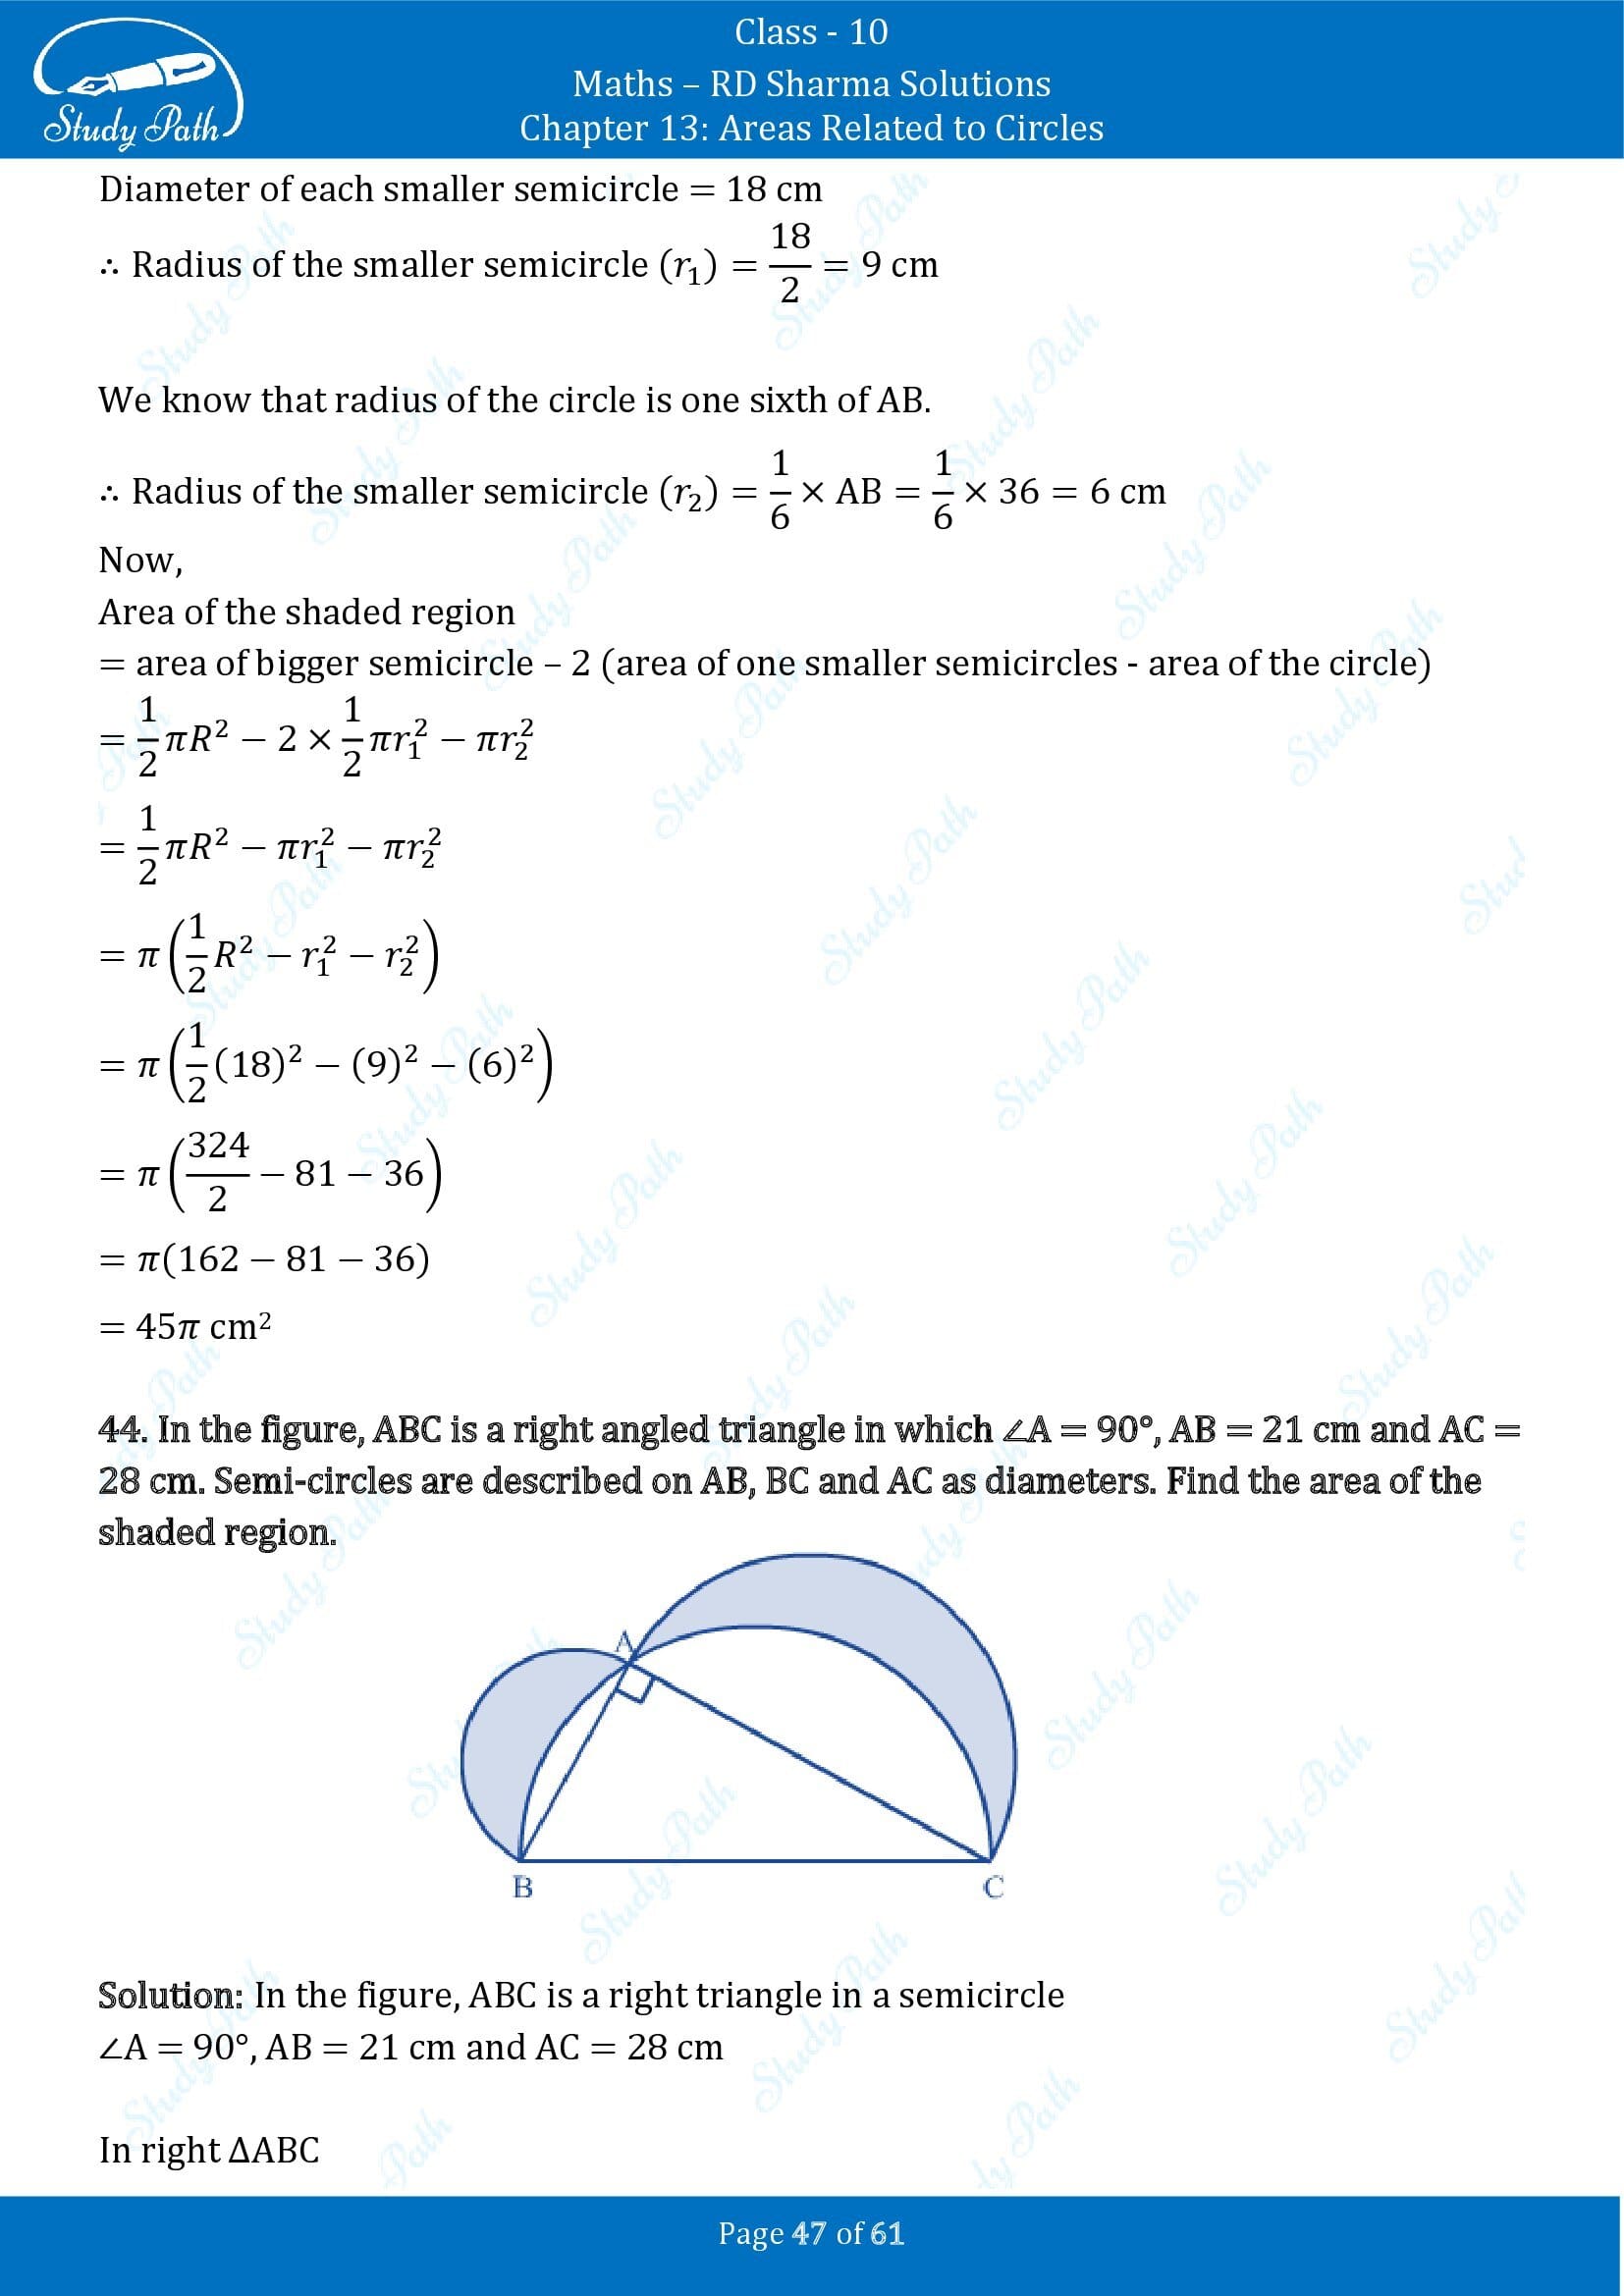 RD Sharma Solutions Class 10 Chapter 13 Areas Related to Circles Exercise 13.4 00047